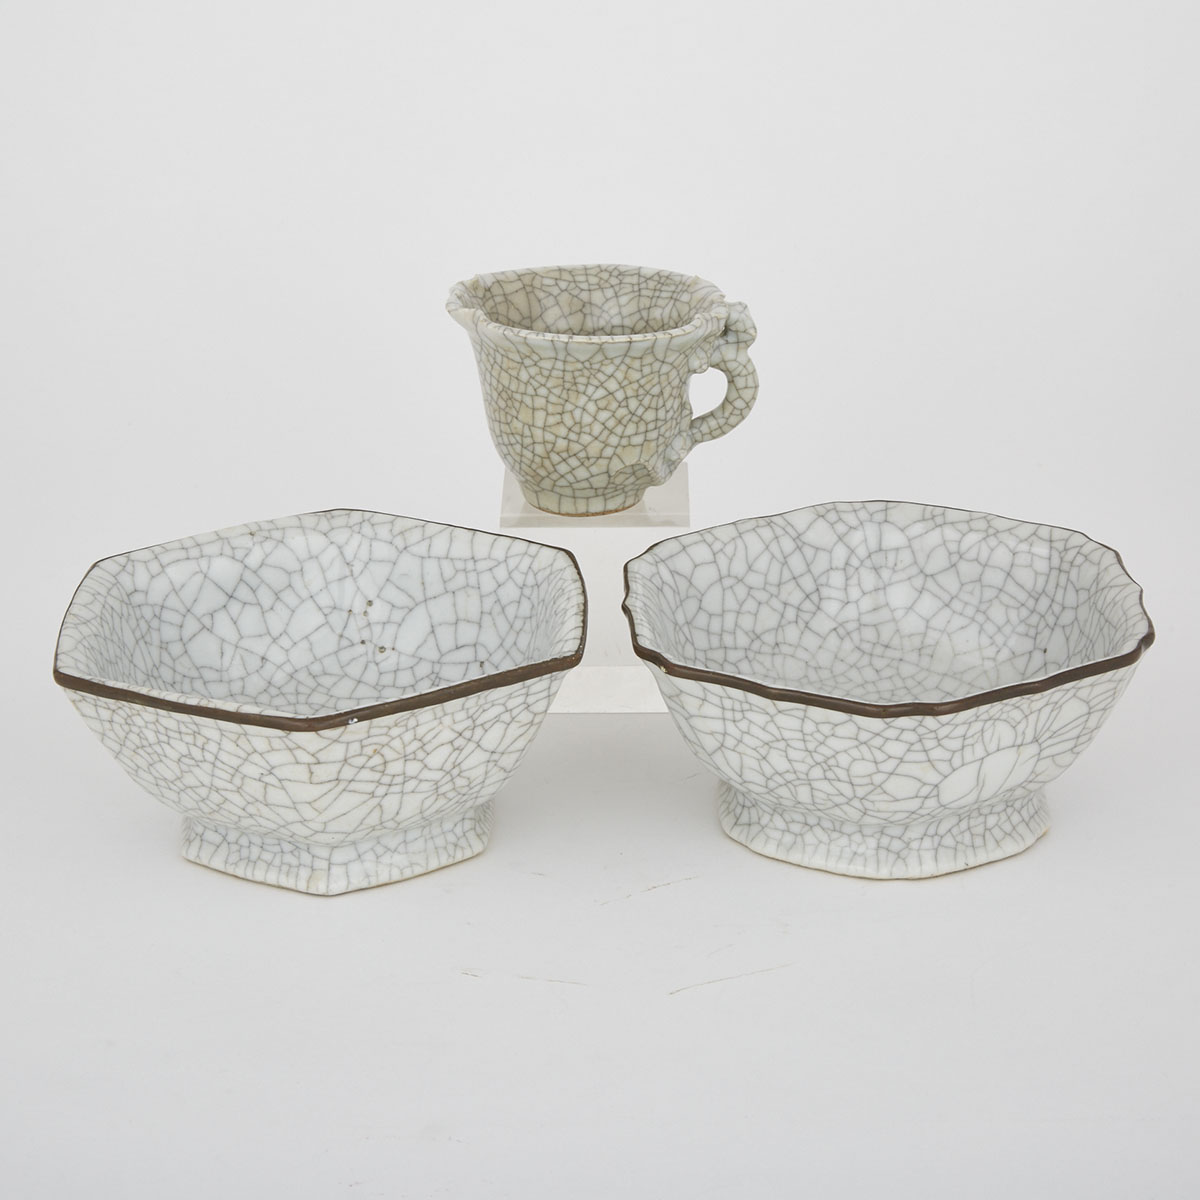 Three Pieces of Crackle Glazed Porcelain